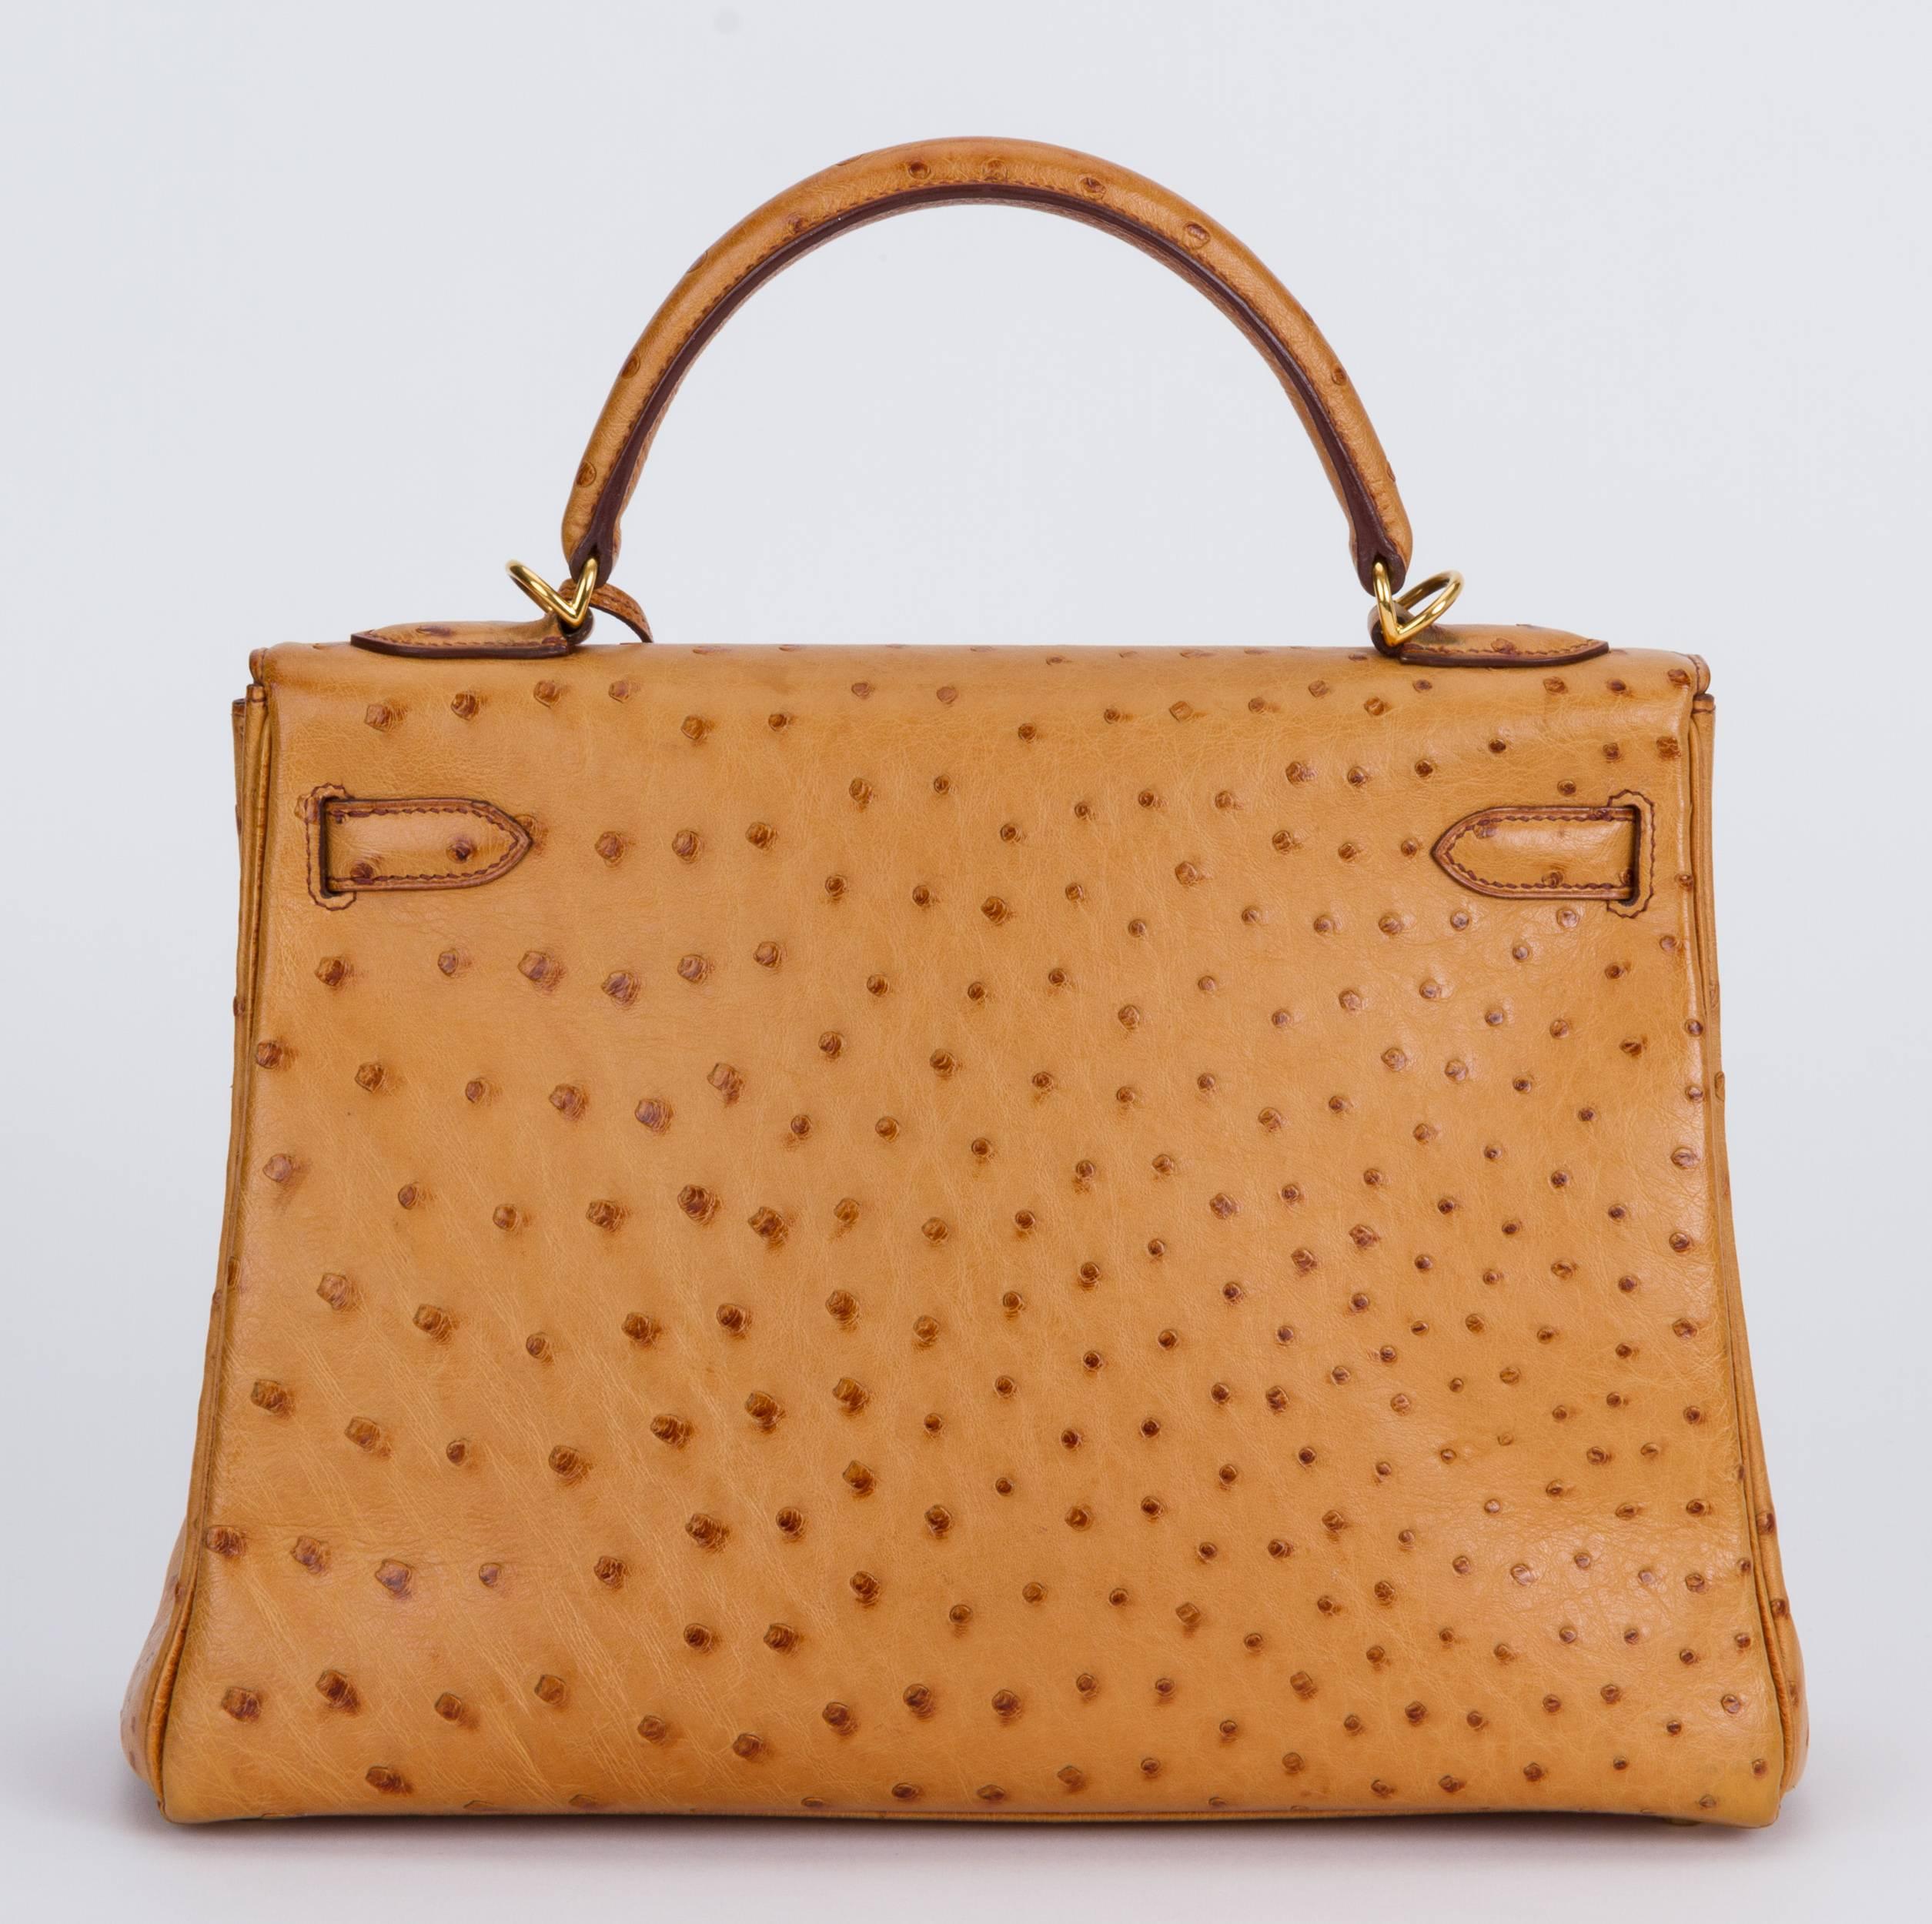 Hermès rare Kelly bag 32 cm return in natural ostrich leather and gold-plated hardware. Blind stamped 